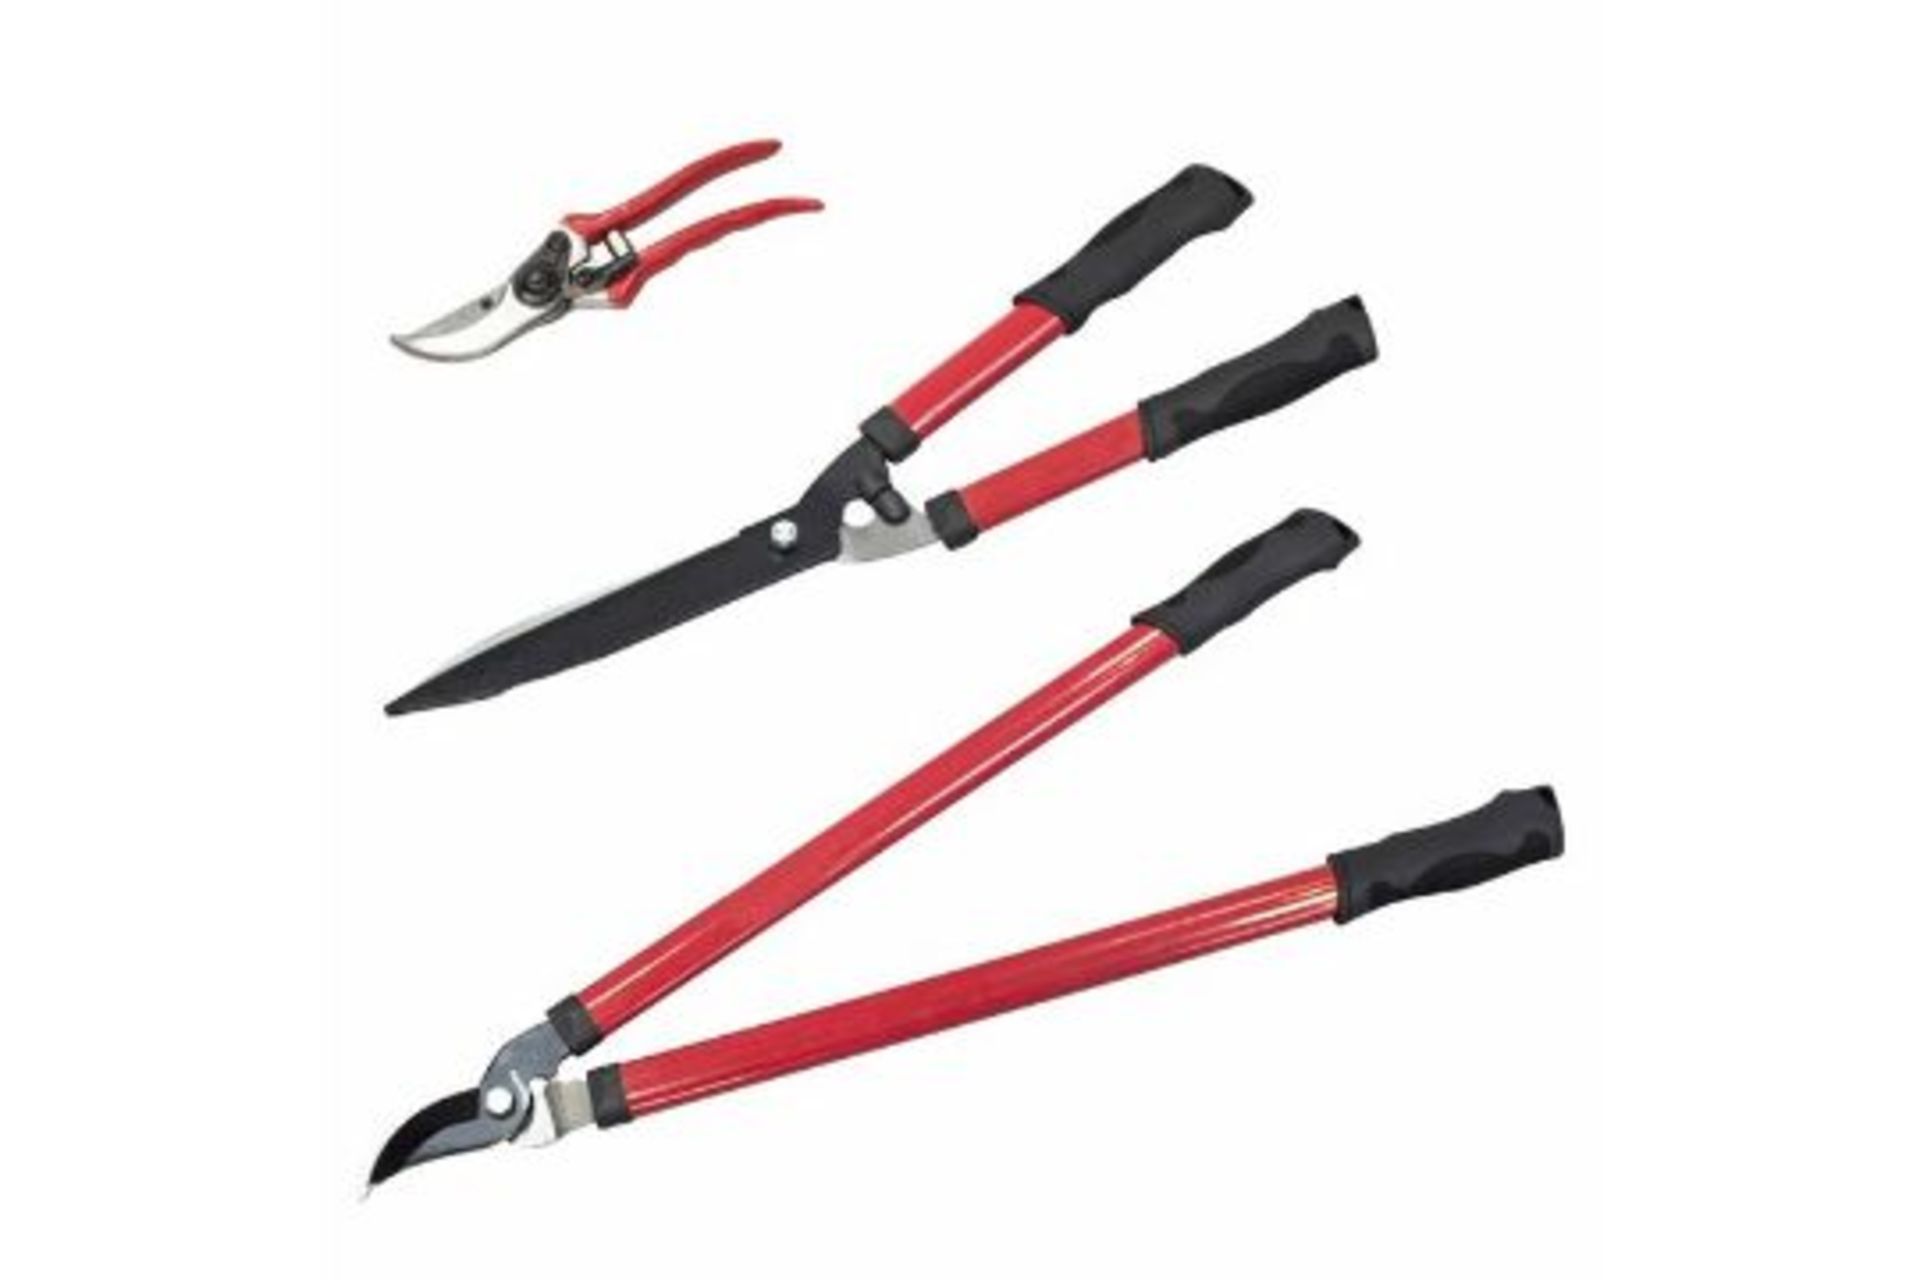 New 3pc Pruning Set